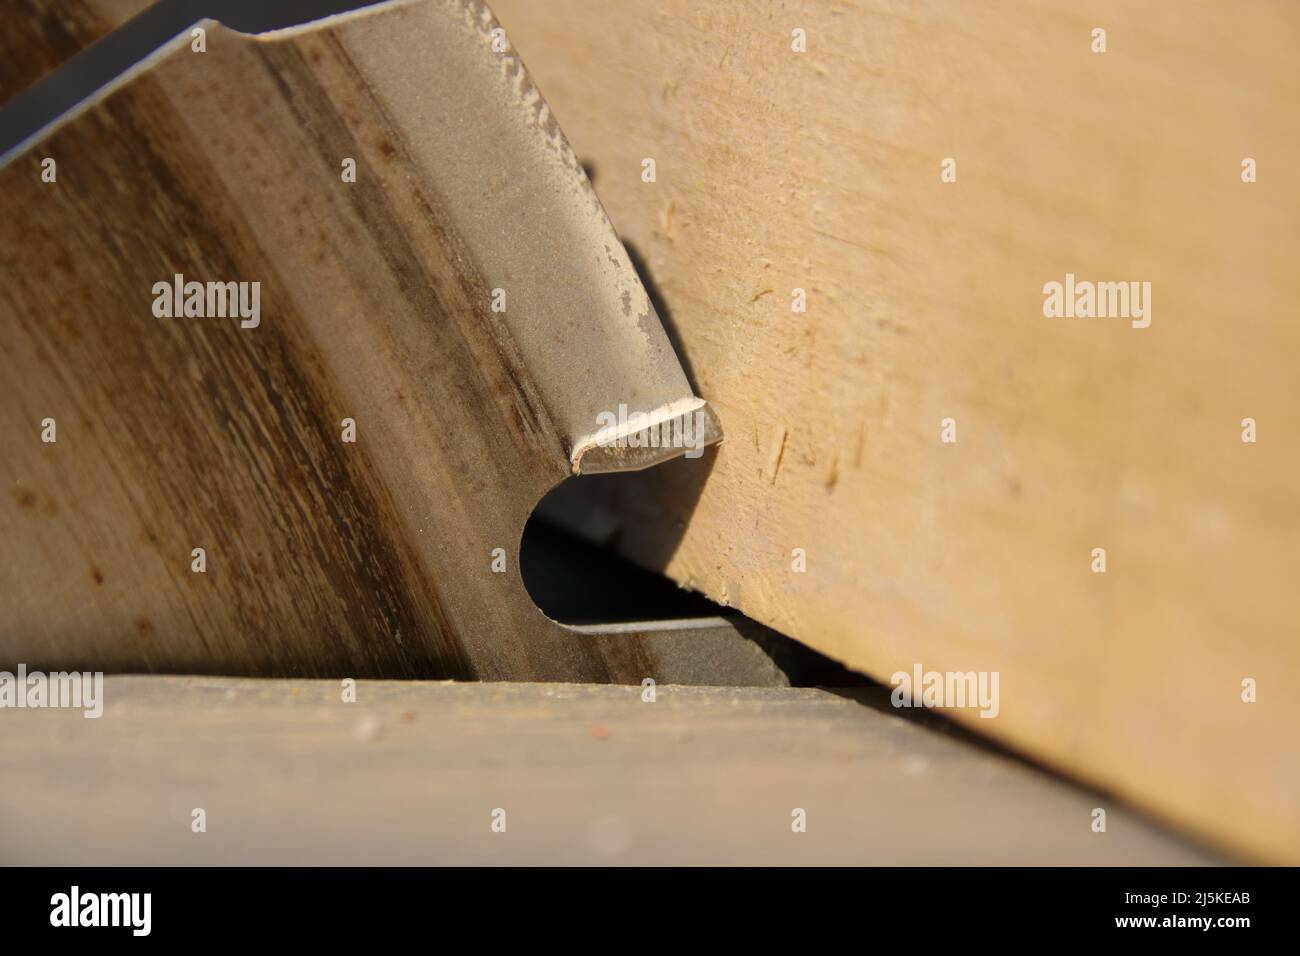 A piece of lumber rests against the saw blade of a circular saw Stock Photo